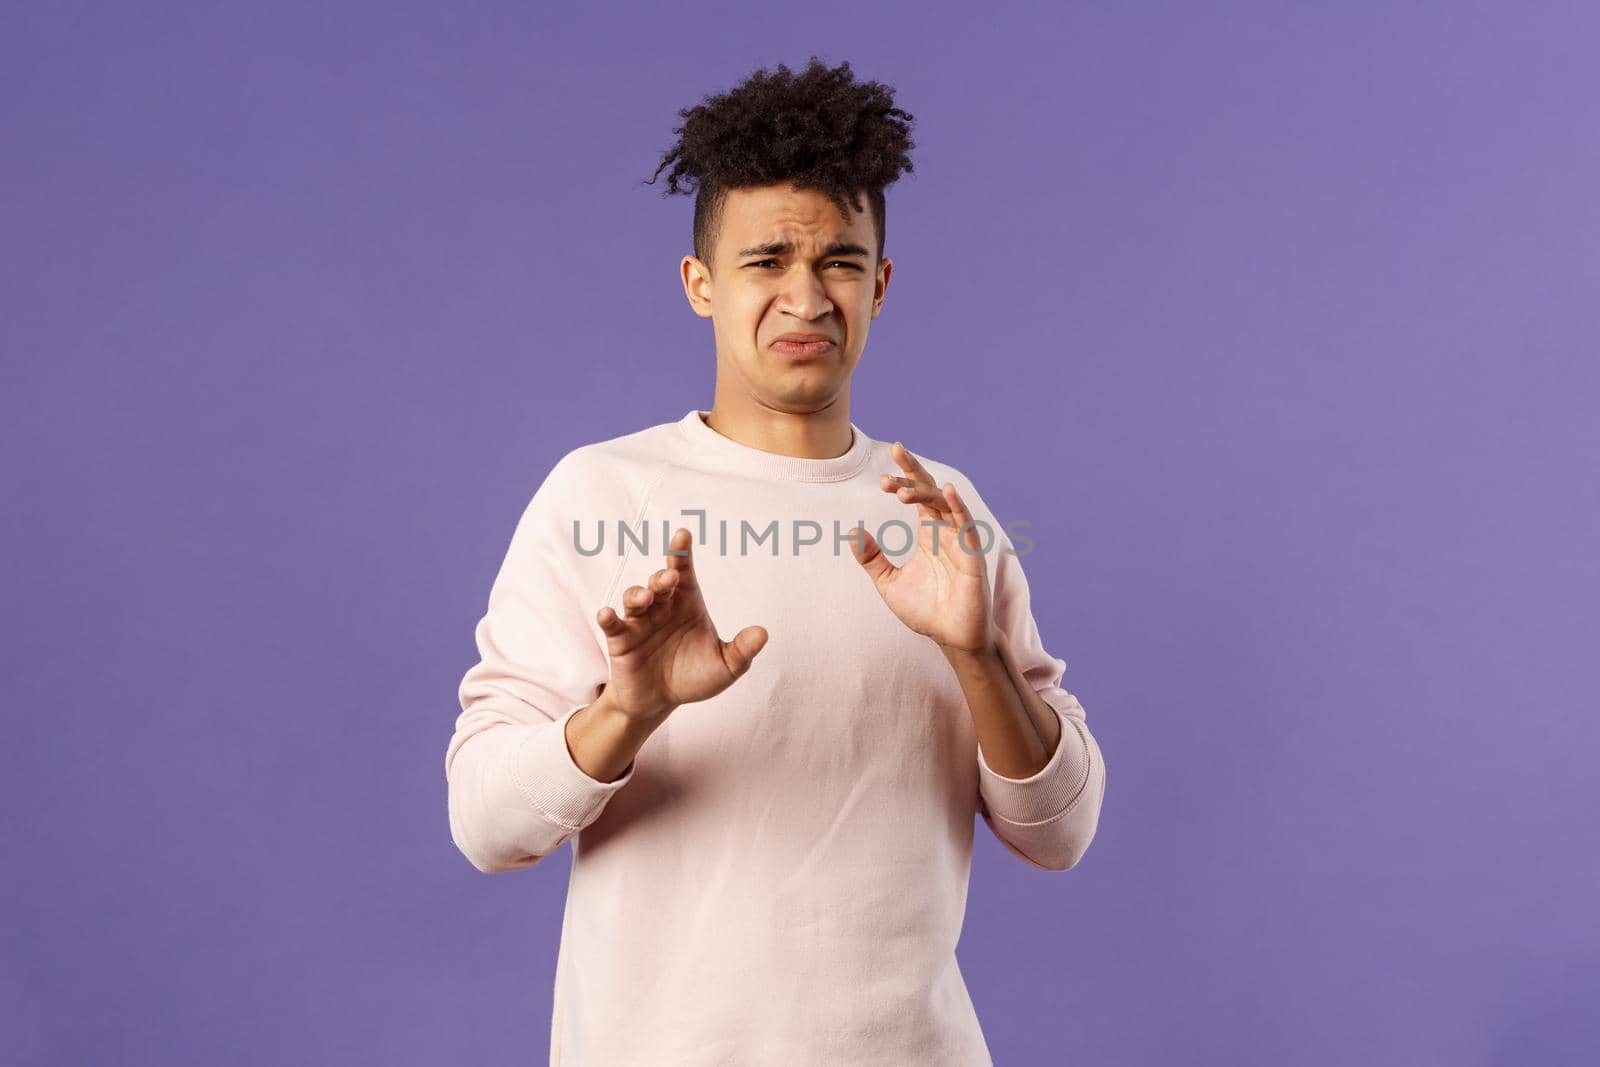 Phew get it away from me. Portrait of disgusted young man smelling something awful, step away and blocking it with raised arms, refuse grimacing with aversion and reluctance, purple background.